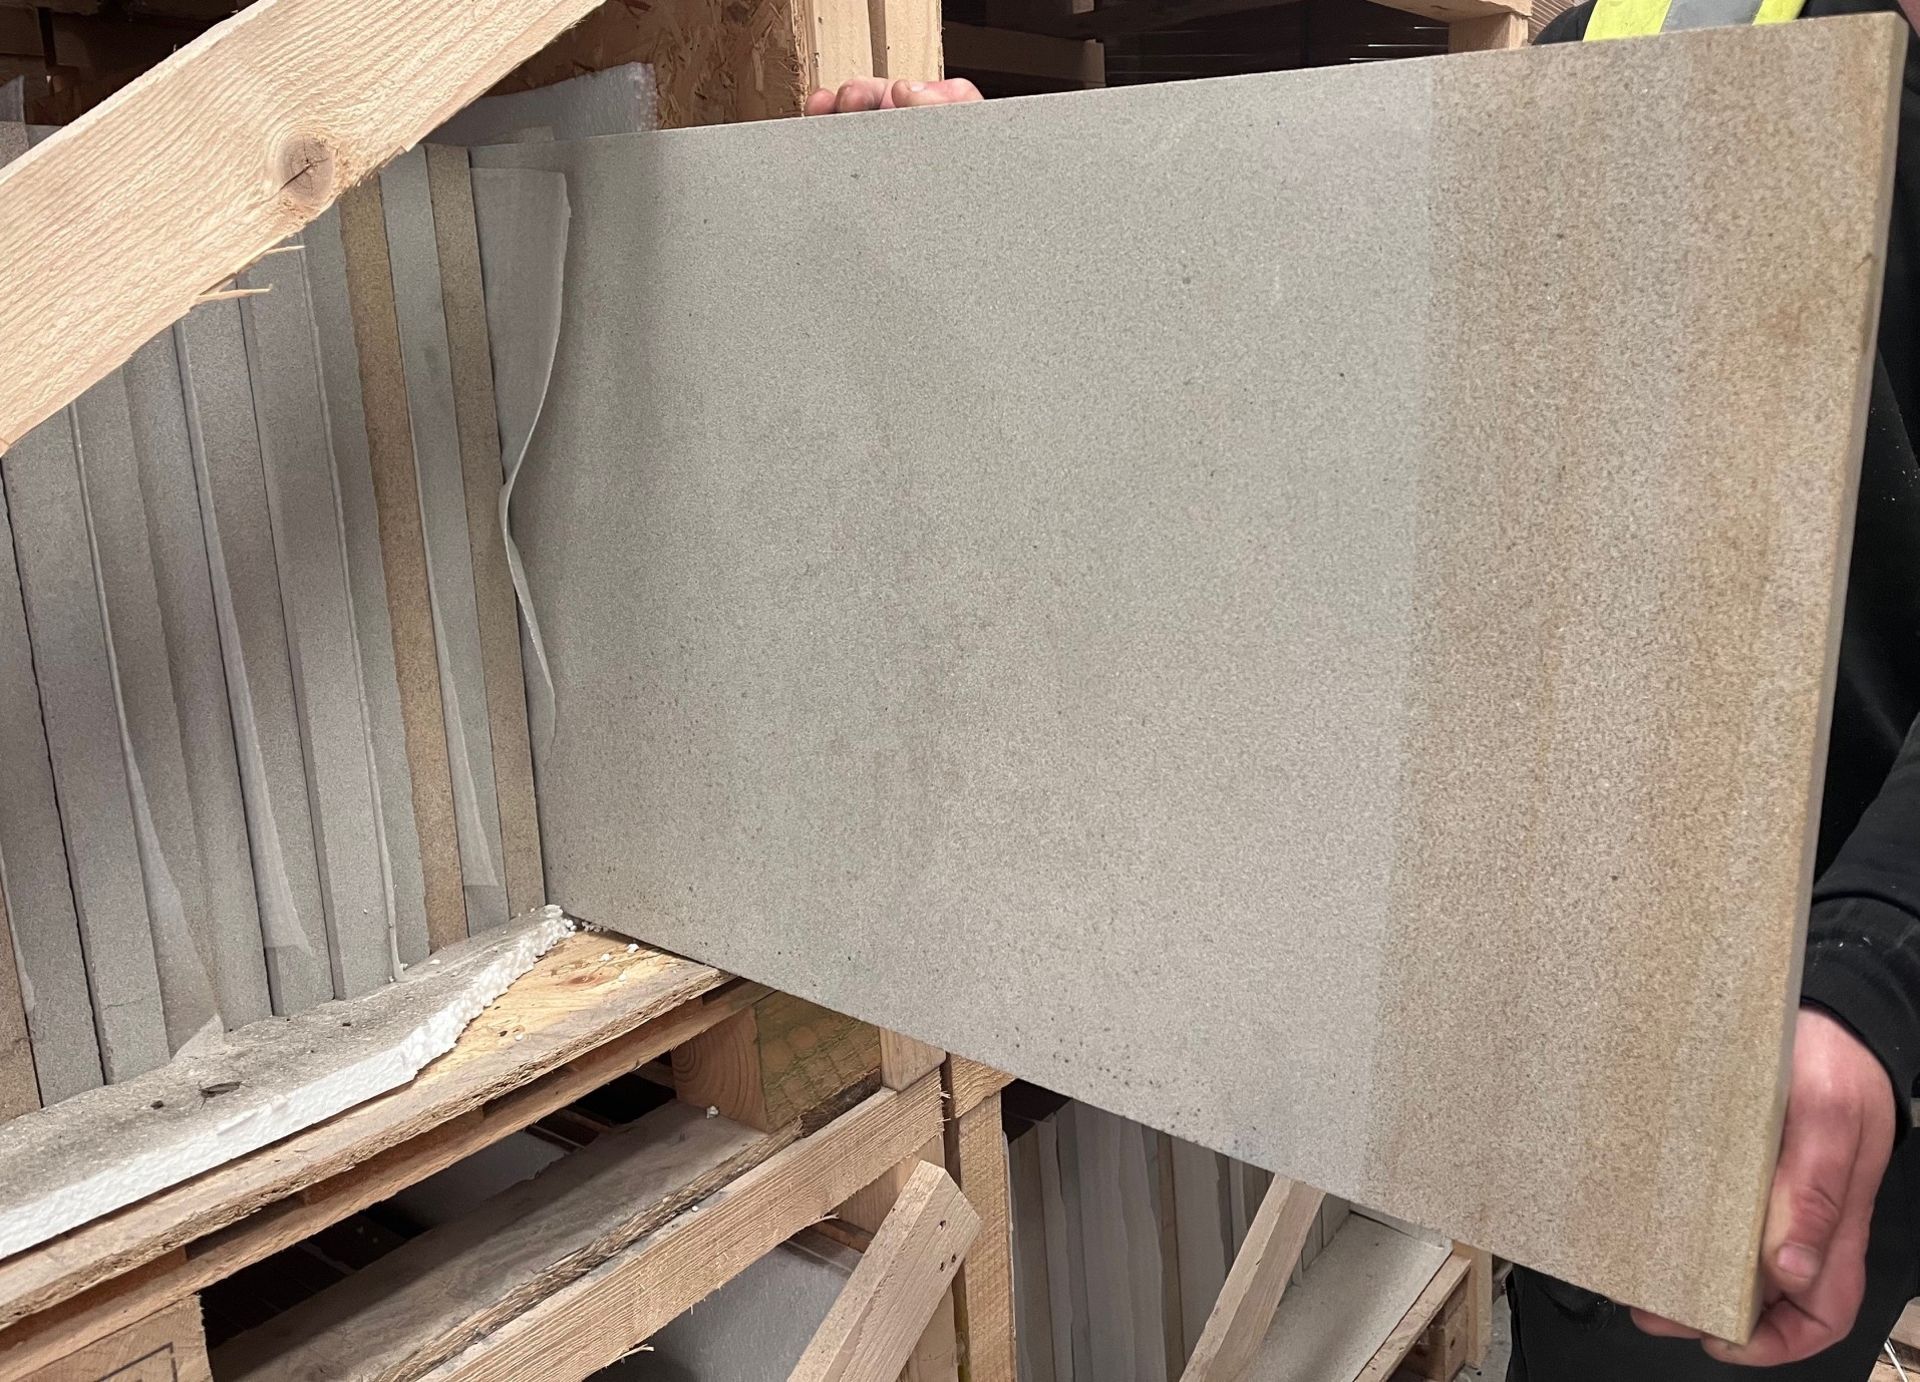 Contents to 3 pallets of BLOCKSTONE MOUSELOW NATURAL SANDSTONE, RUBBED FINISH FACING/PATIO STONE. - Image 2 of 8